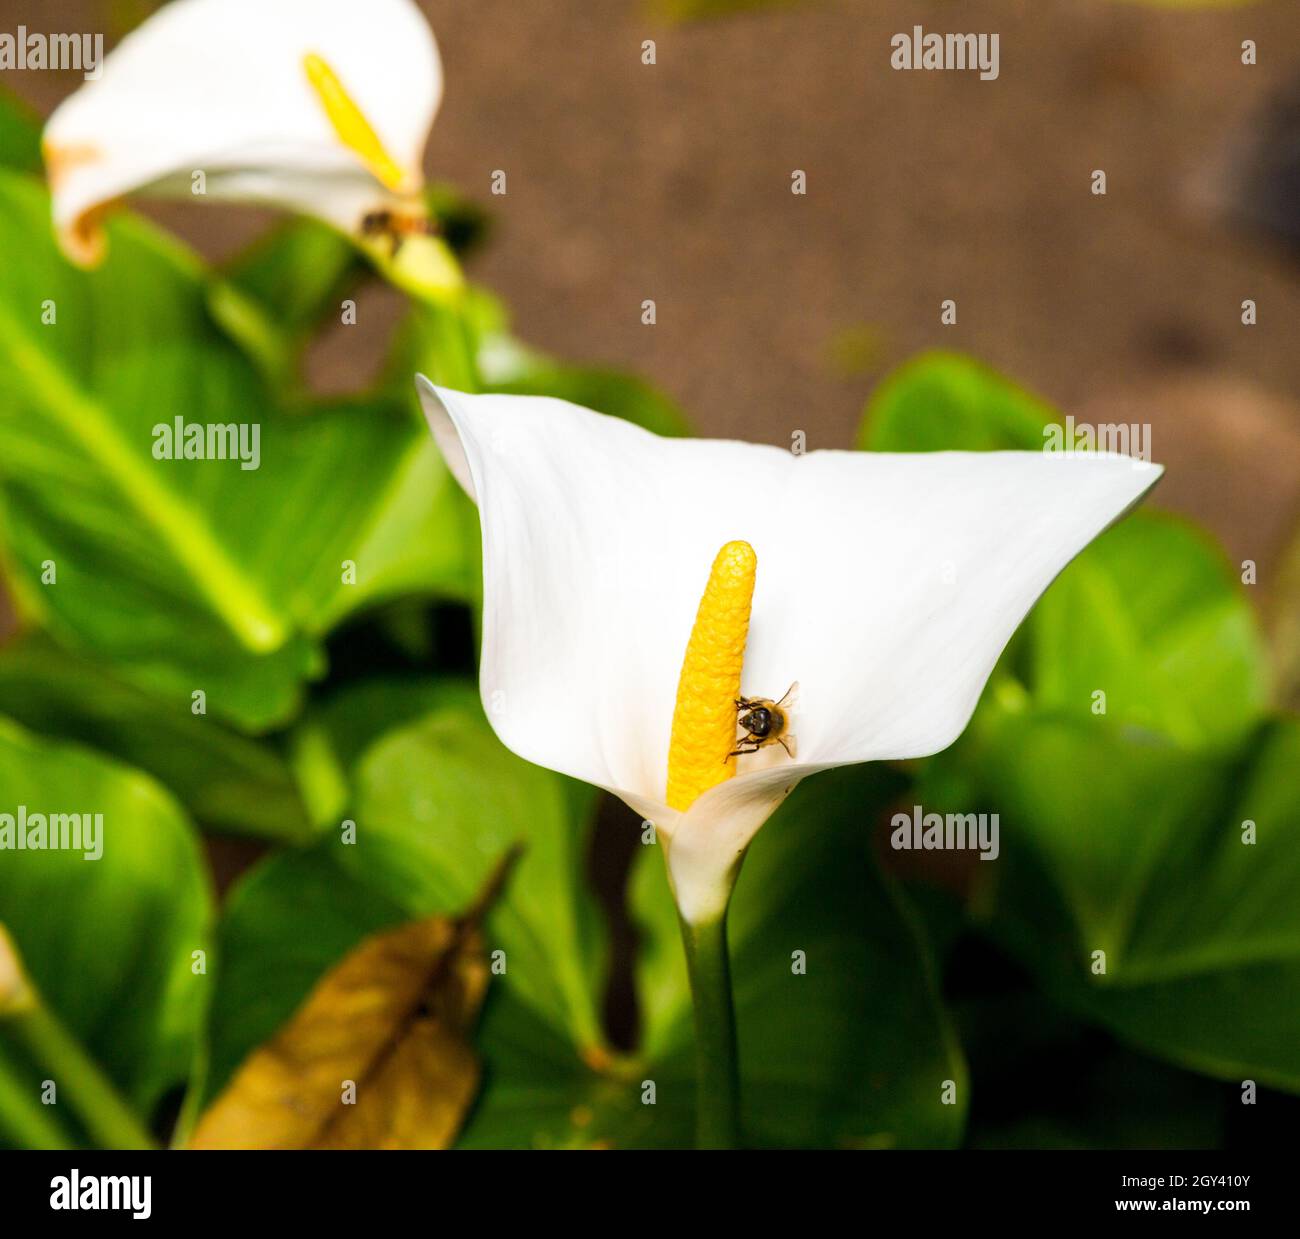 Arum lily often used at funerals. Also called peace lily. Stock Photo